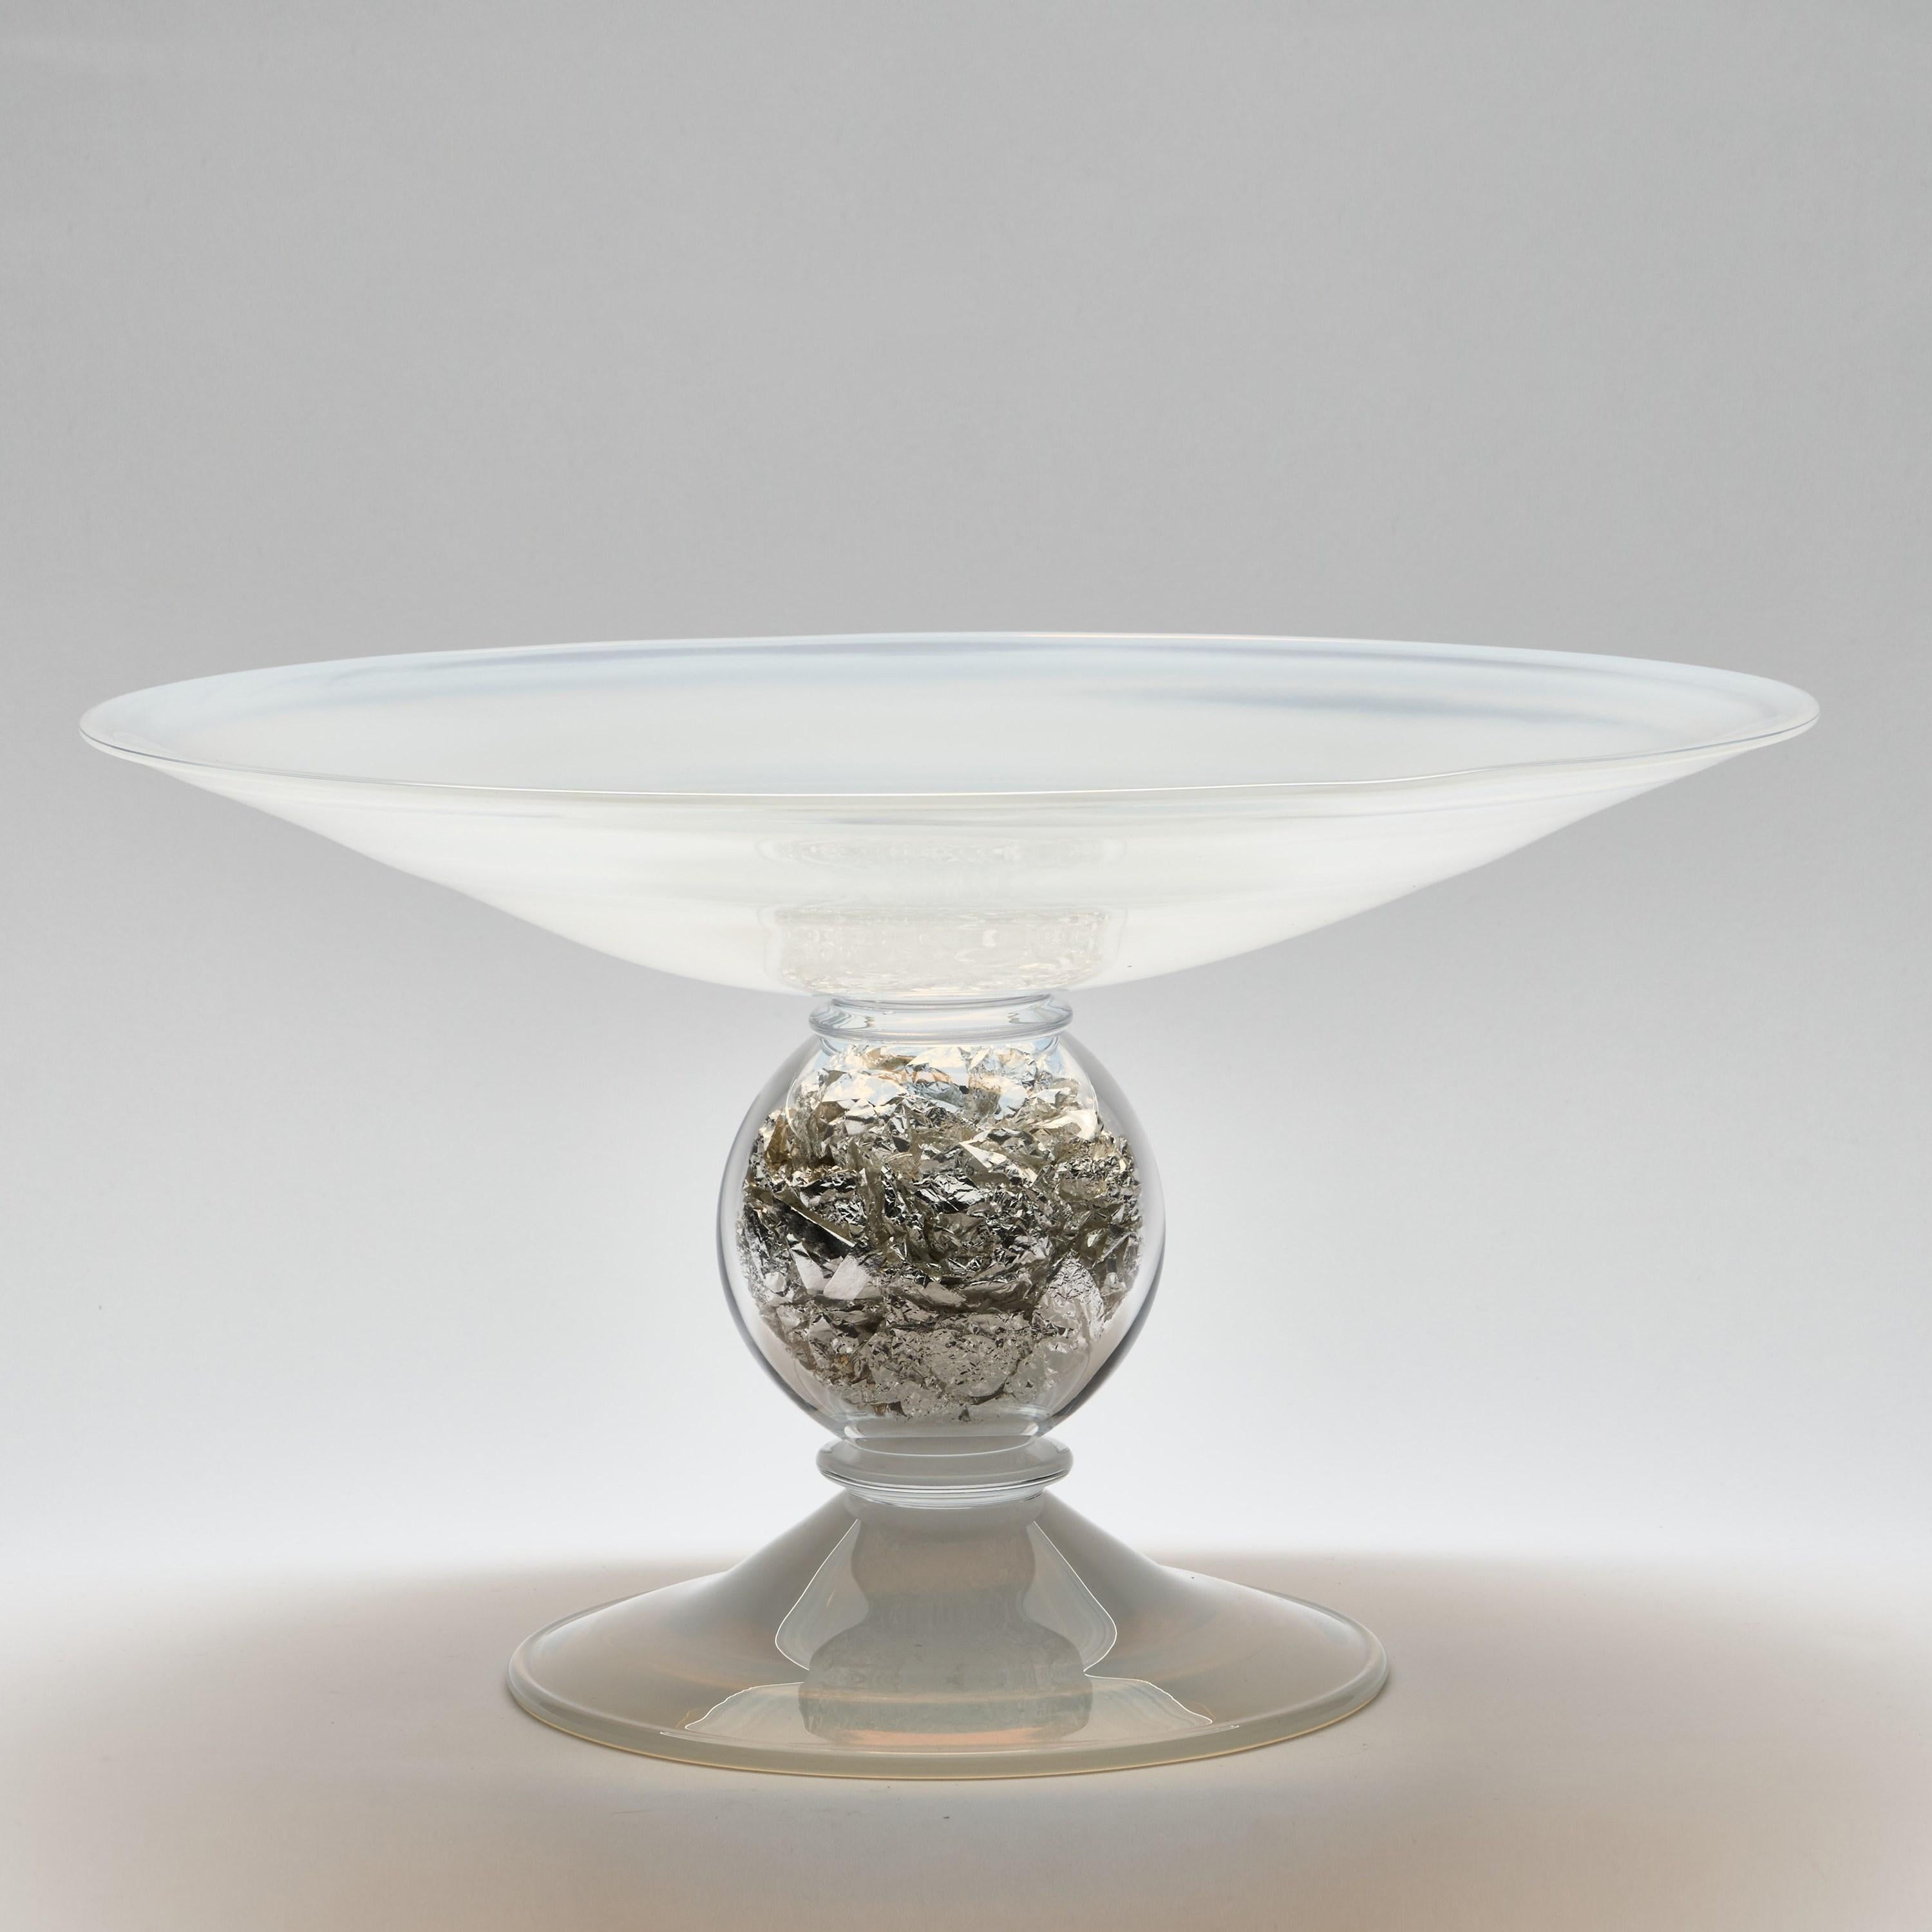 Hand-Crafted Gambo d’Argento a milky white glass & silver leaf centrepiece by Anthony Scala For Sale